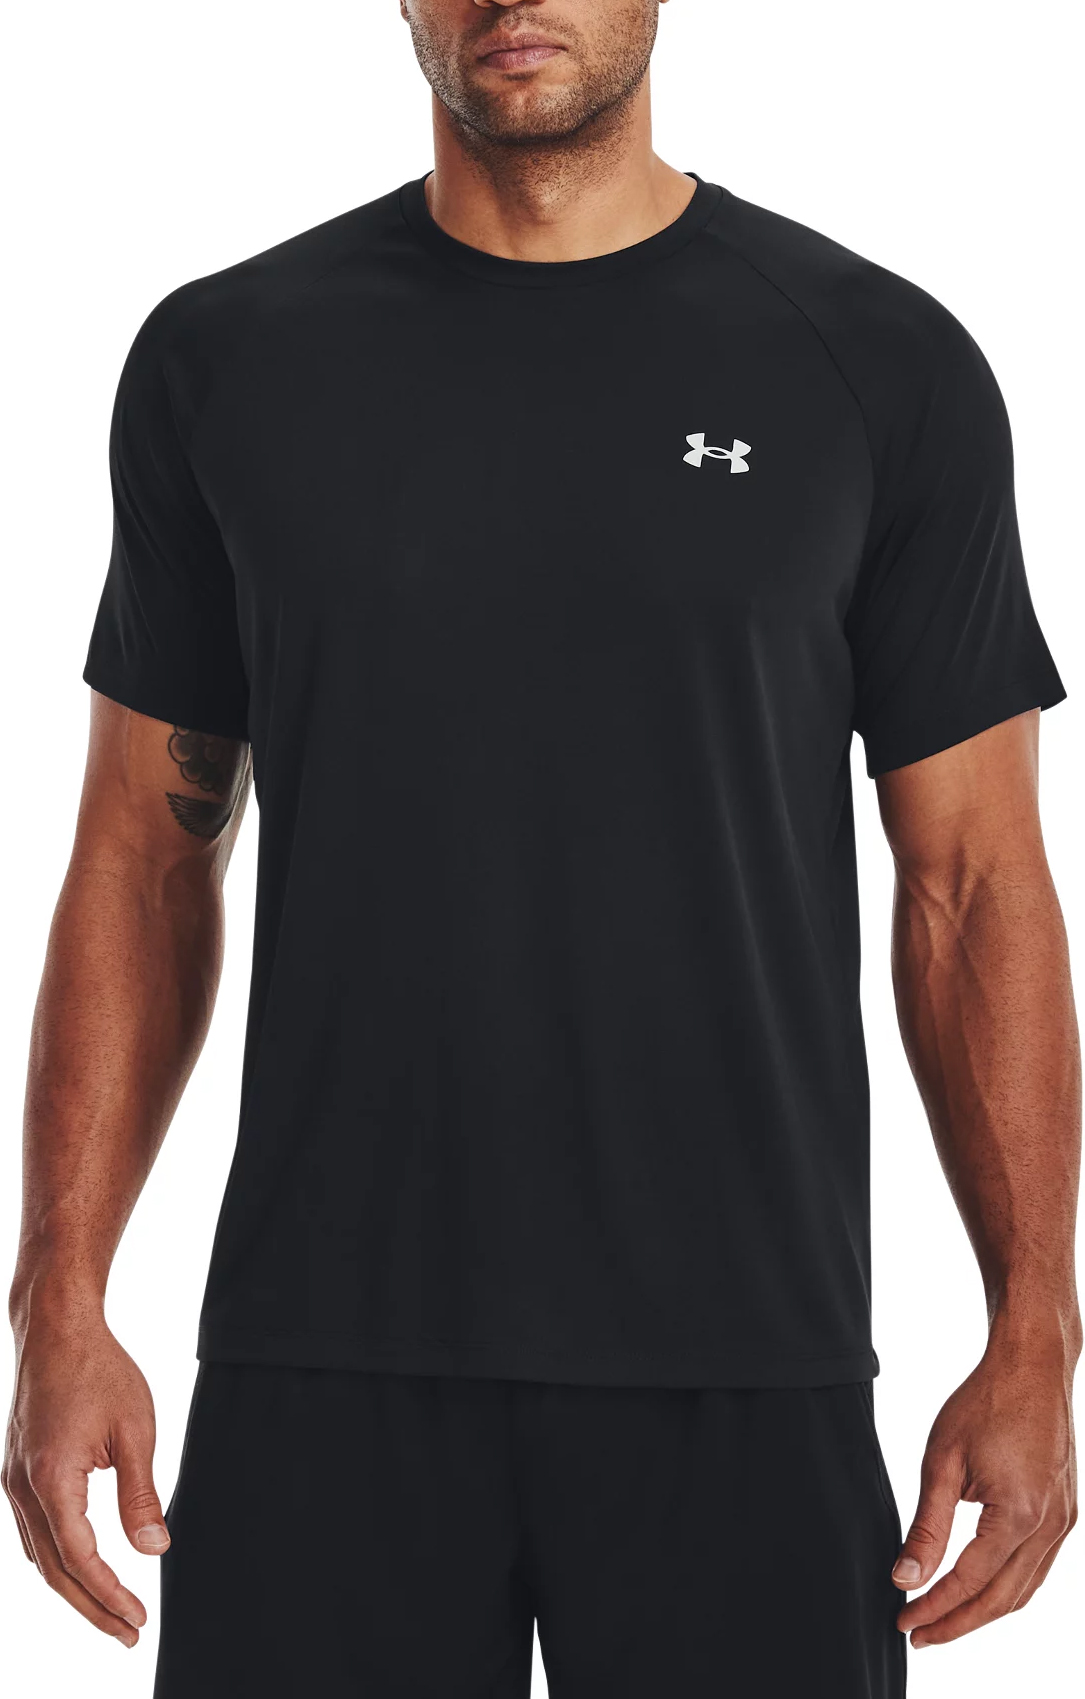 https://i1.t4s.cz/products/1377054-001/under-armour-ua-tech-reflective-ss-blk-554523-1377054-001.jpg